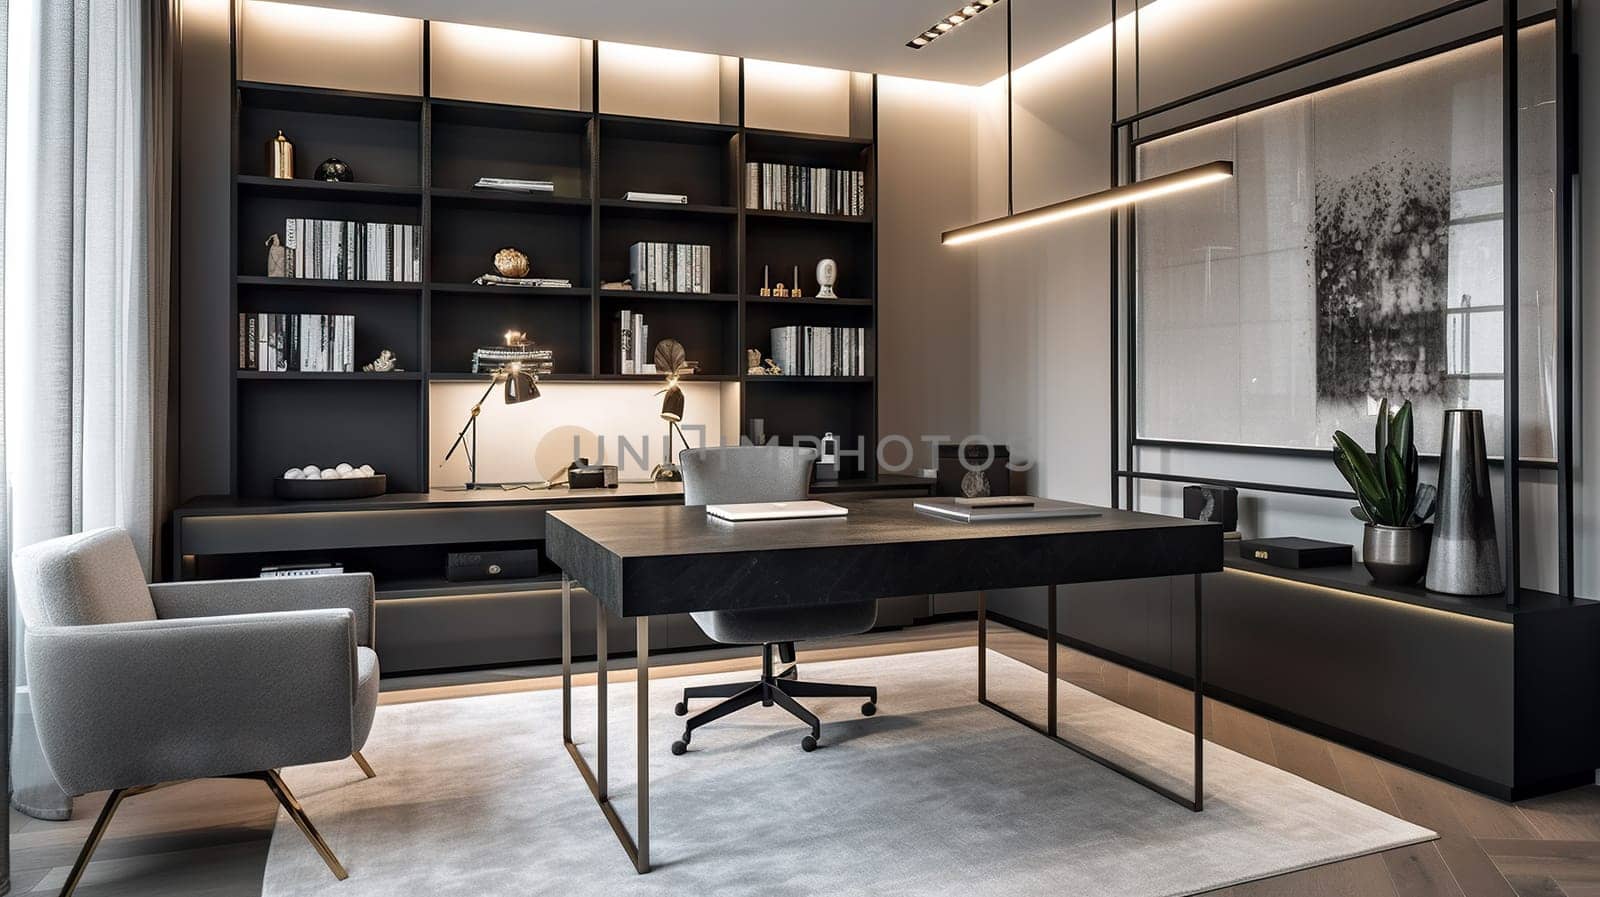 Modern Home Office Interior With Elegant Furniture and Decor by chrisroll